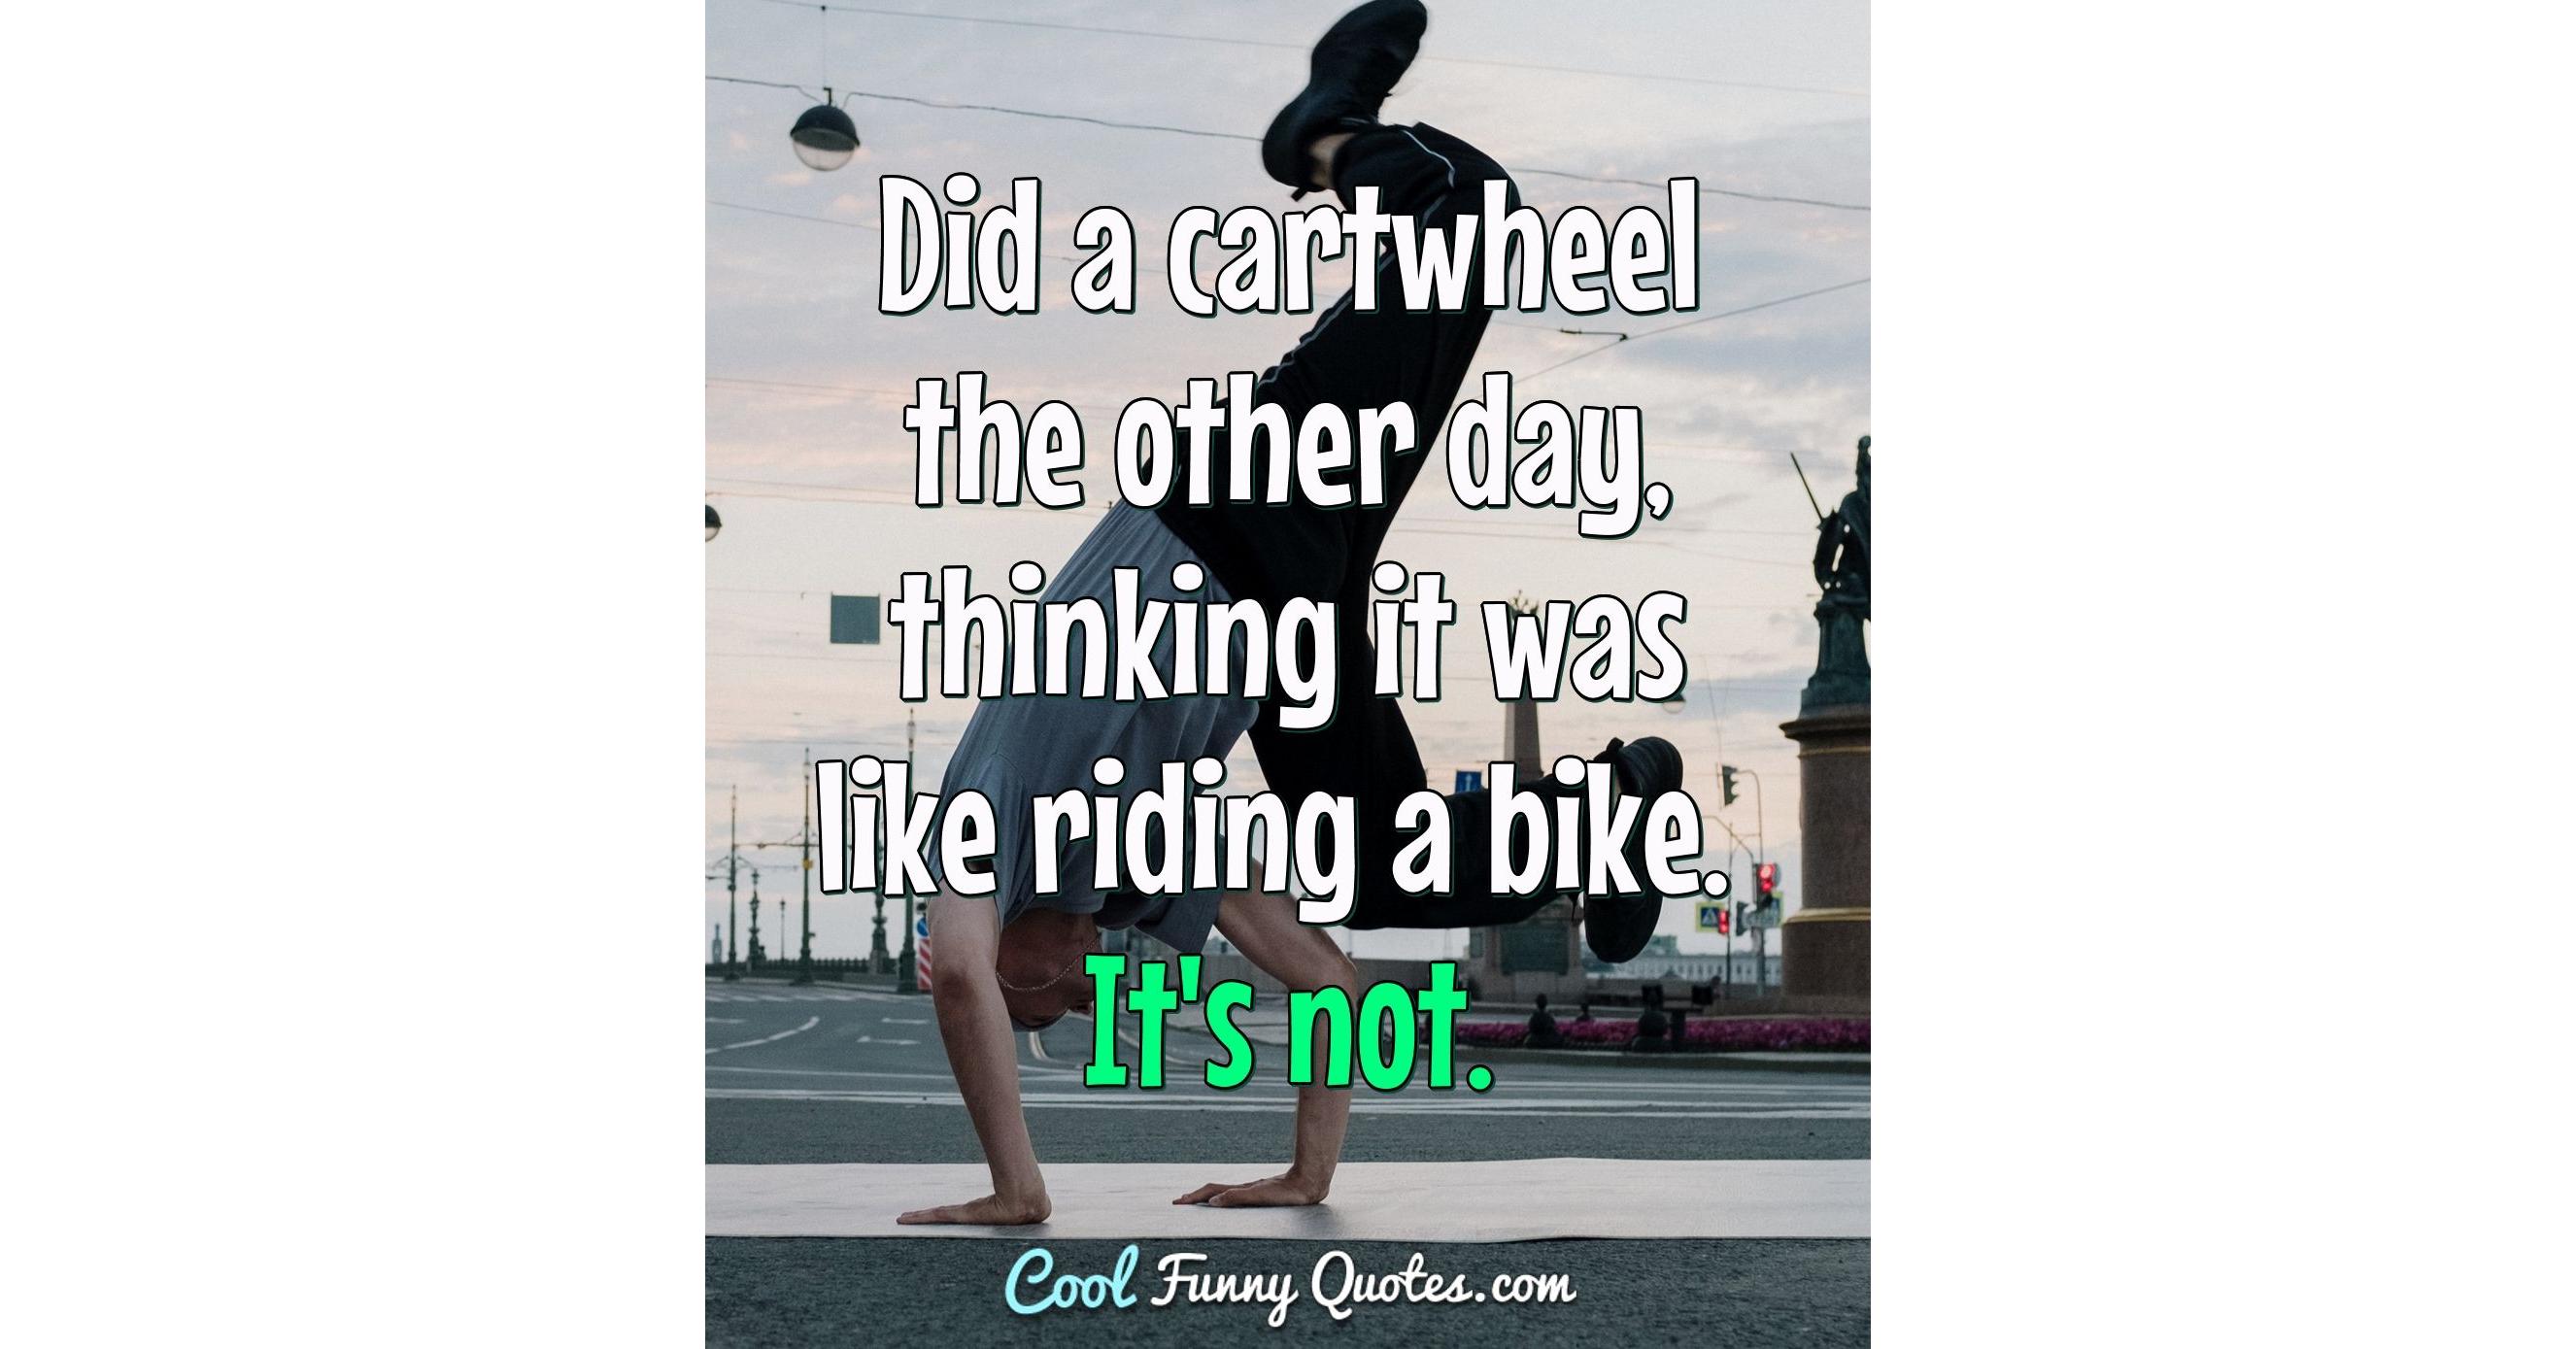 Did a cartwheel the other day, thinking it was like riding a bike. It's not.